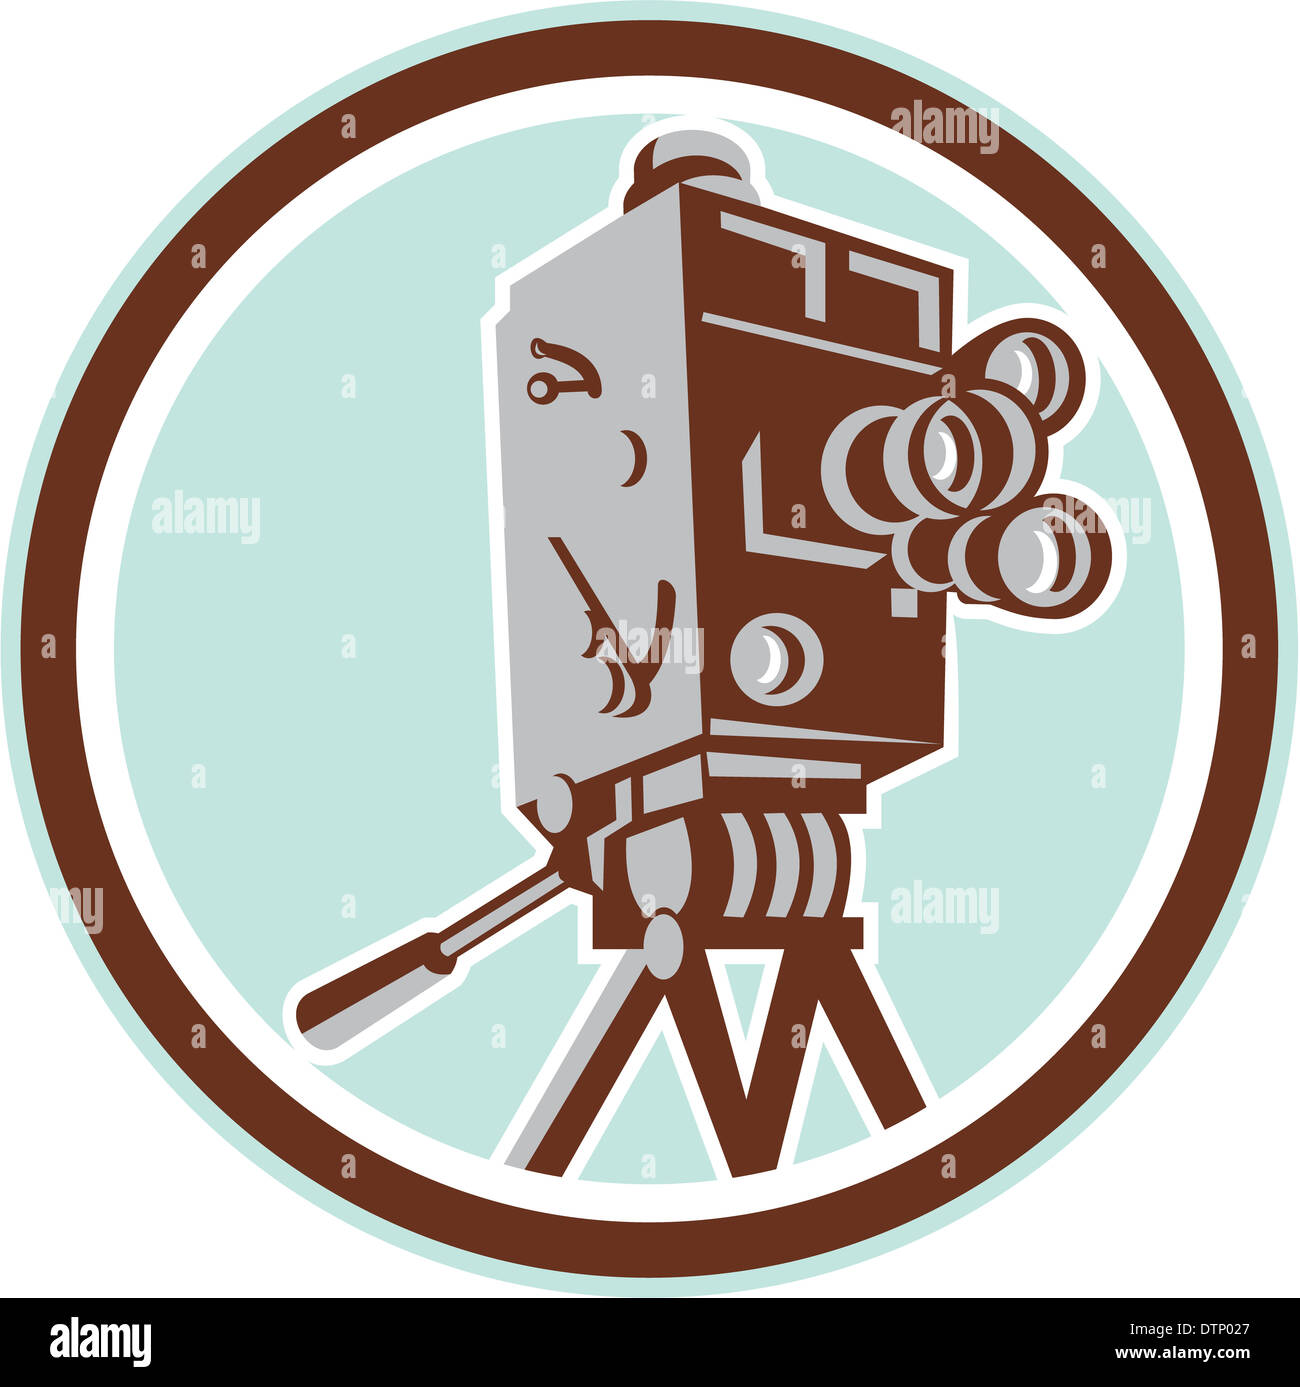 Illustration of a vintage movie film camera set inside circle viewed from low angle done in retro style on isolated background. Stock Photo